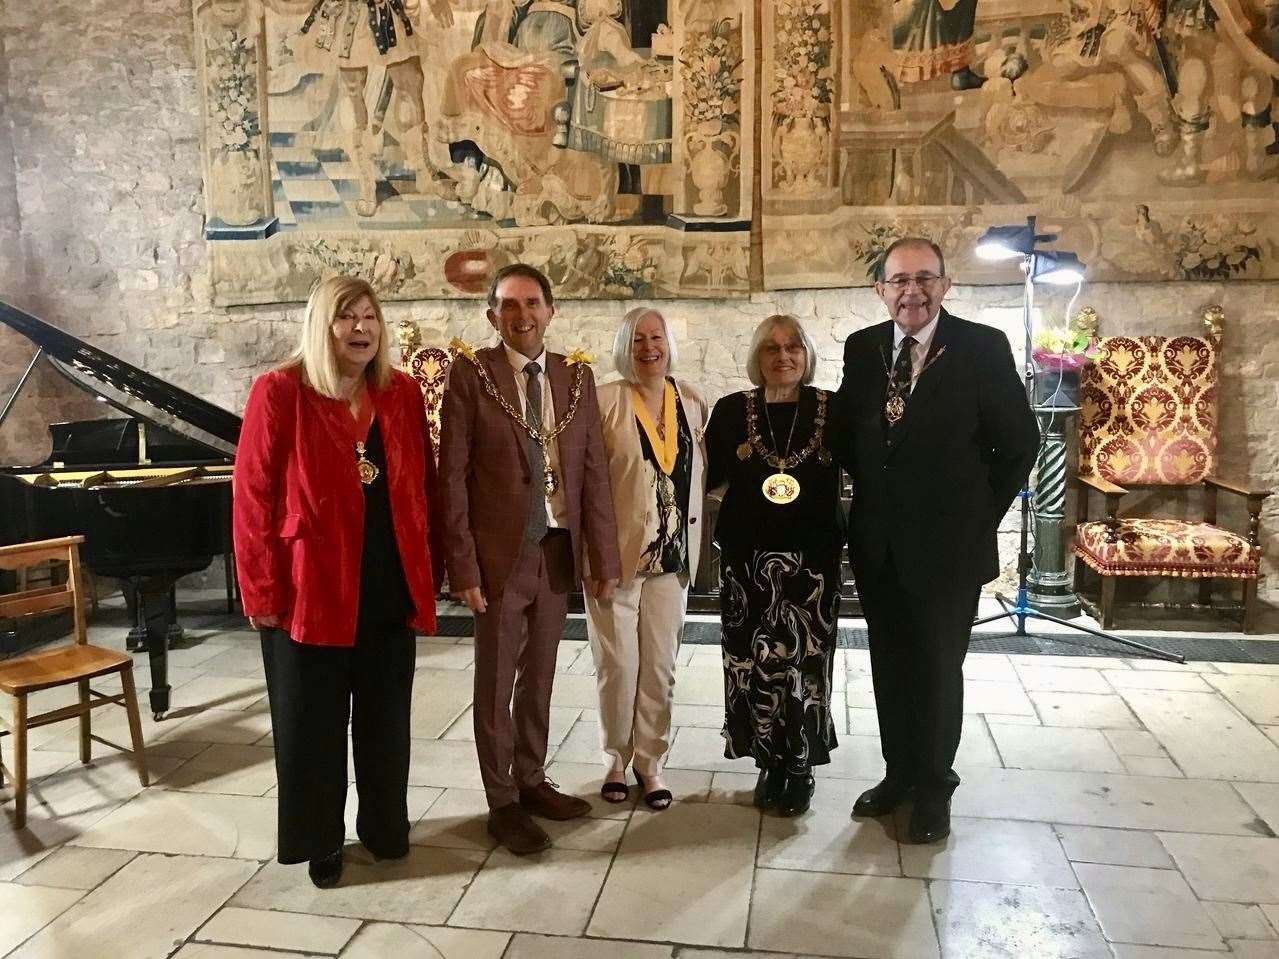 The chair of KCC, Lesley Game with Mayor of Maidstone Cllr Derek Mortimer and Mayor of Medway Cllr Jan Aldous and their consorts